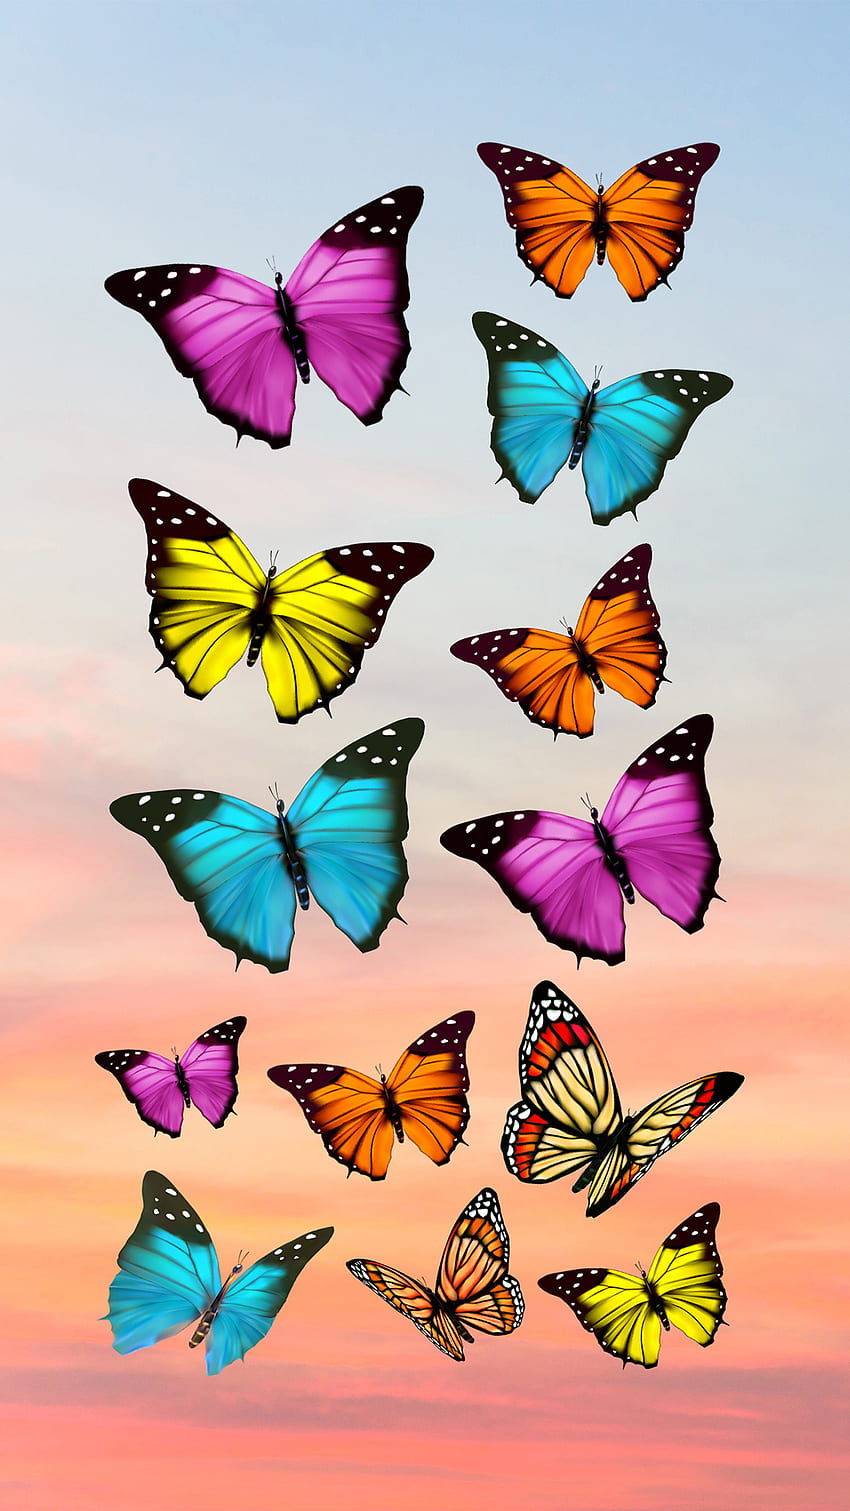 colorful butterflies, aesthetic, sky, girly, butterfly, morpho, Monarch, sunset, cute HD phone wallpaper